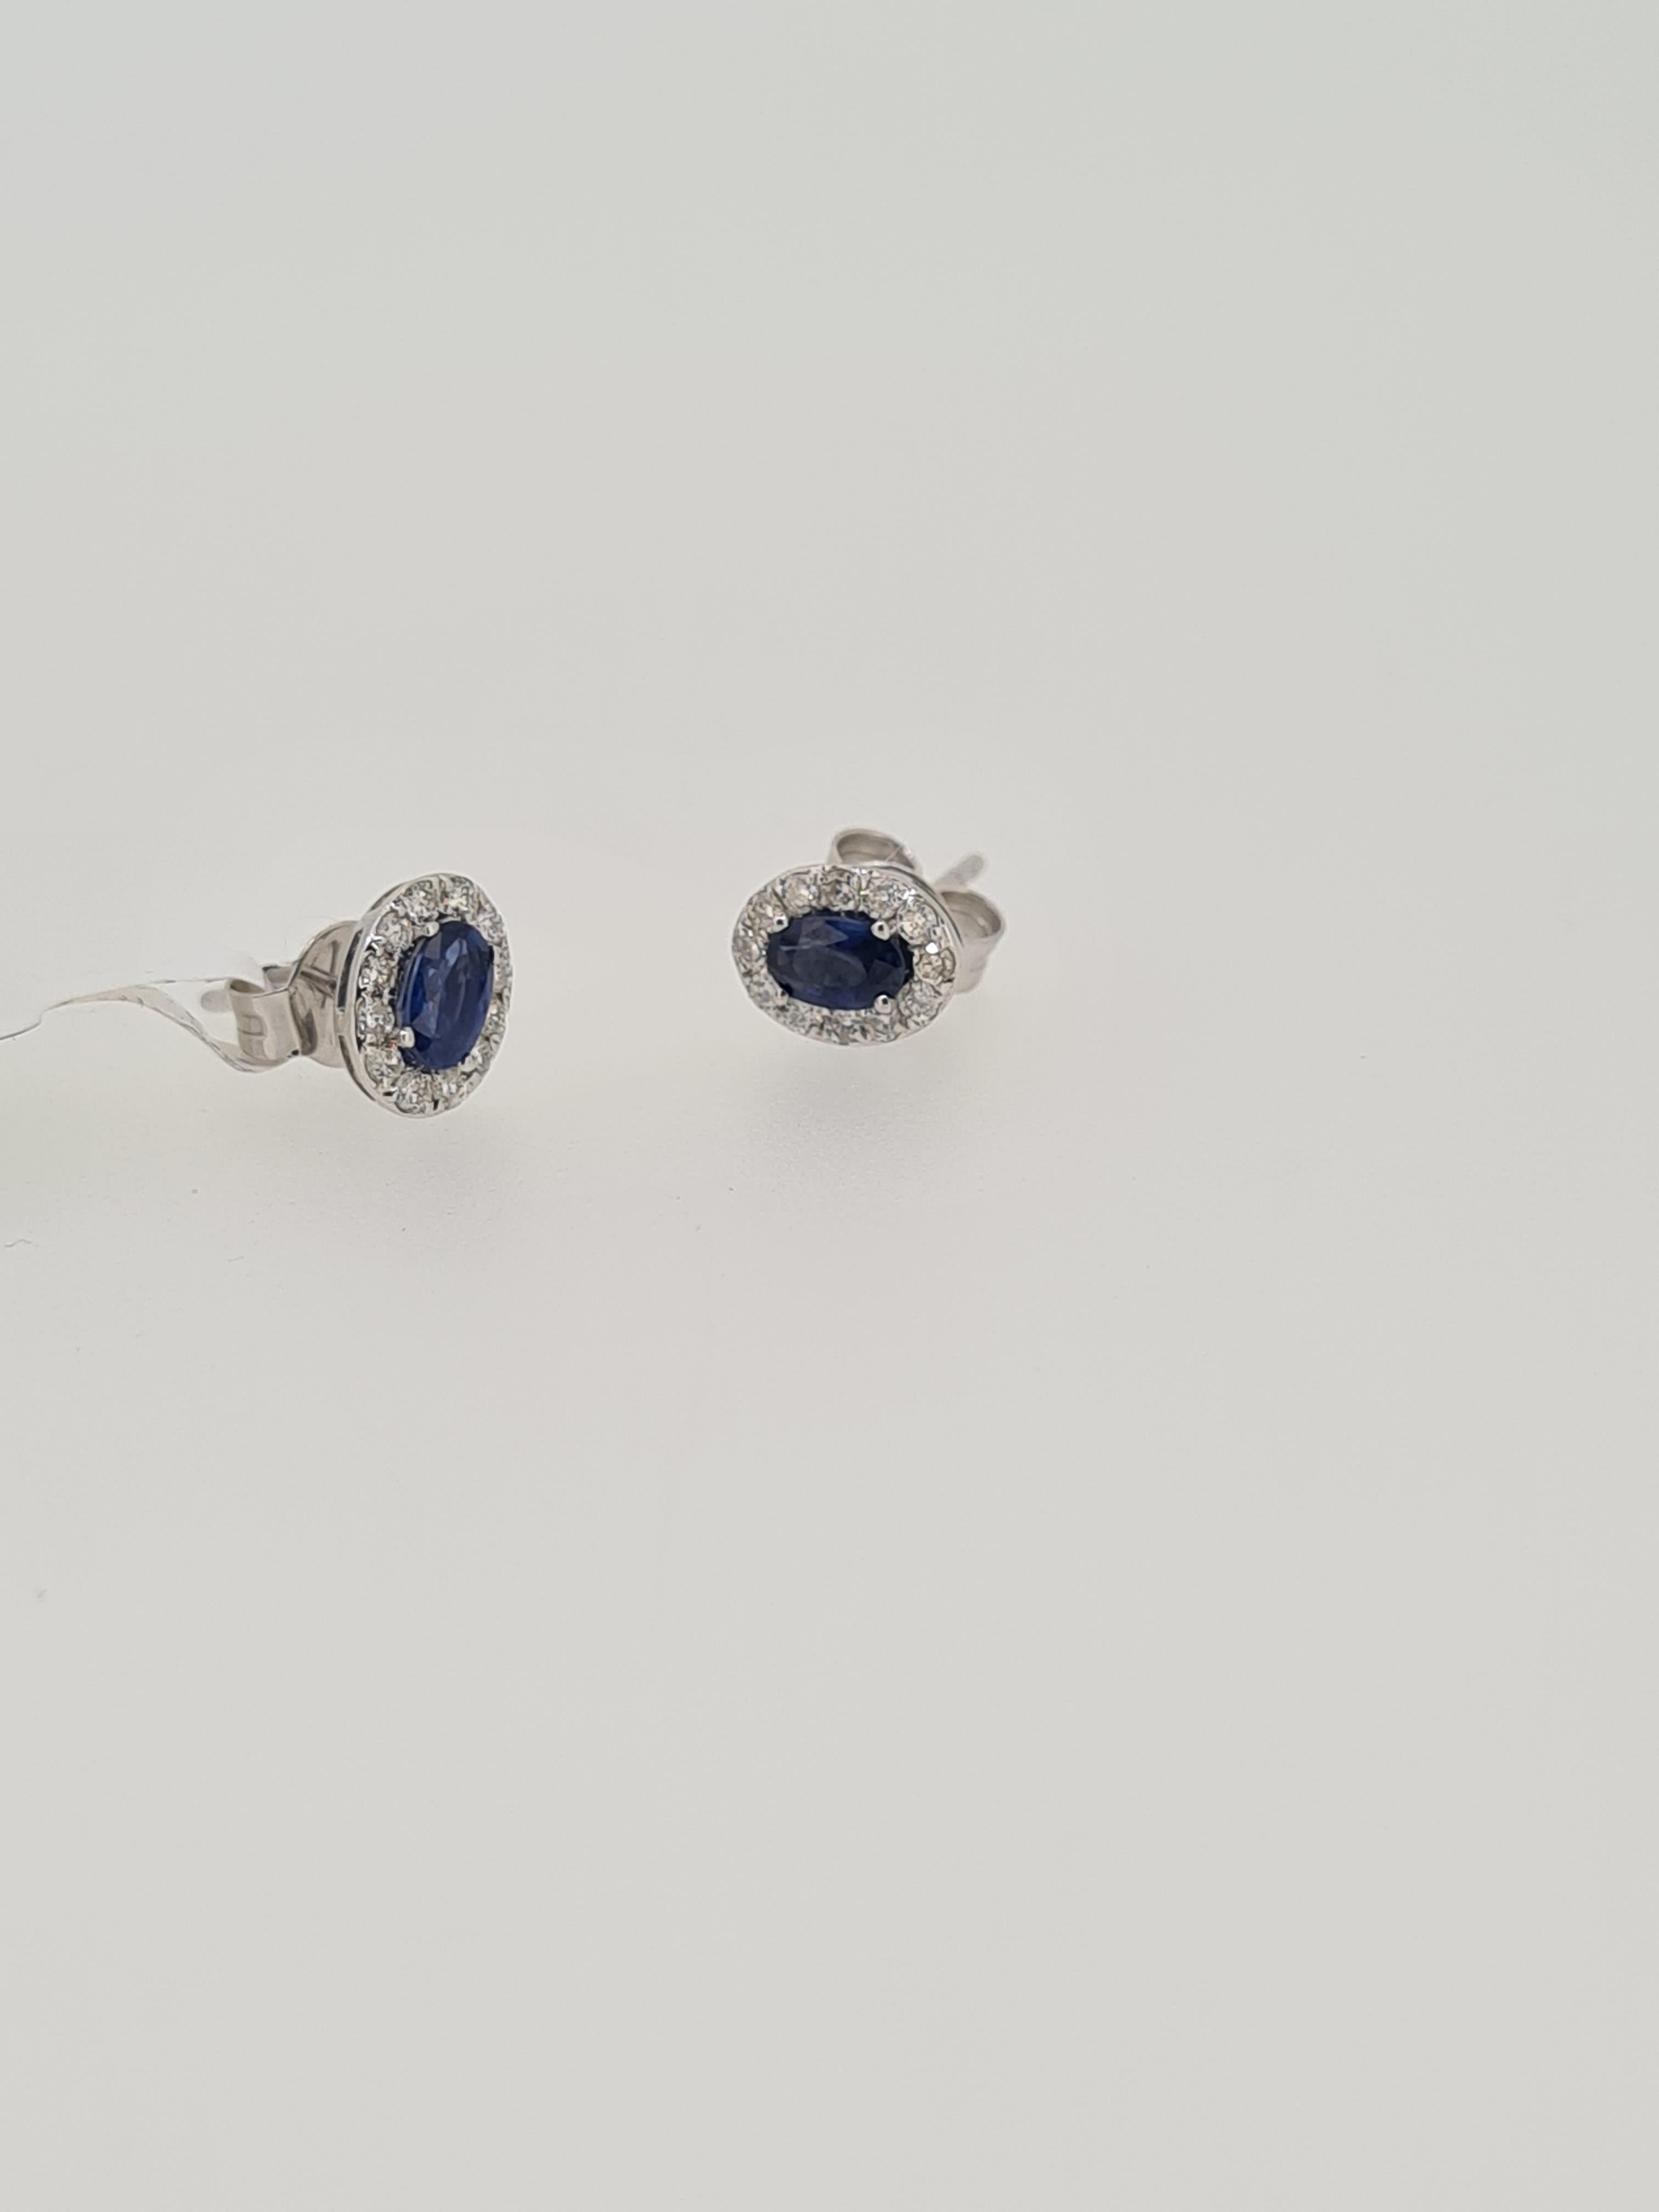 18ct white gold sapphie and diamond stud earrings - Image 3 of 5